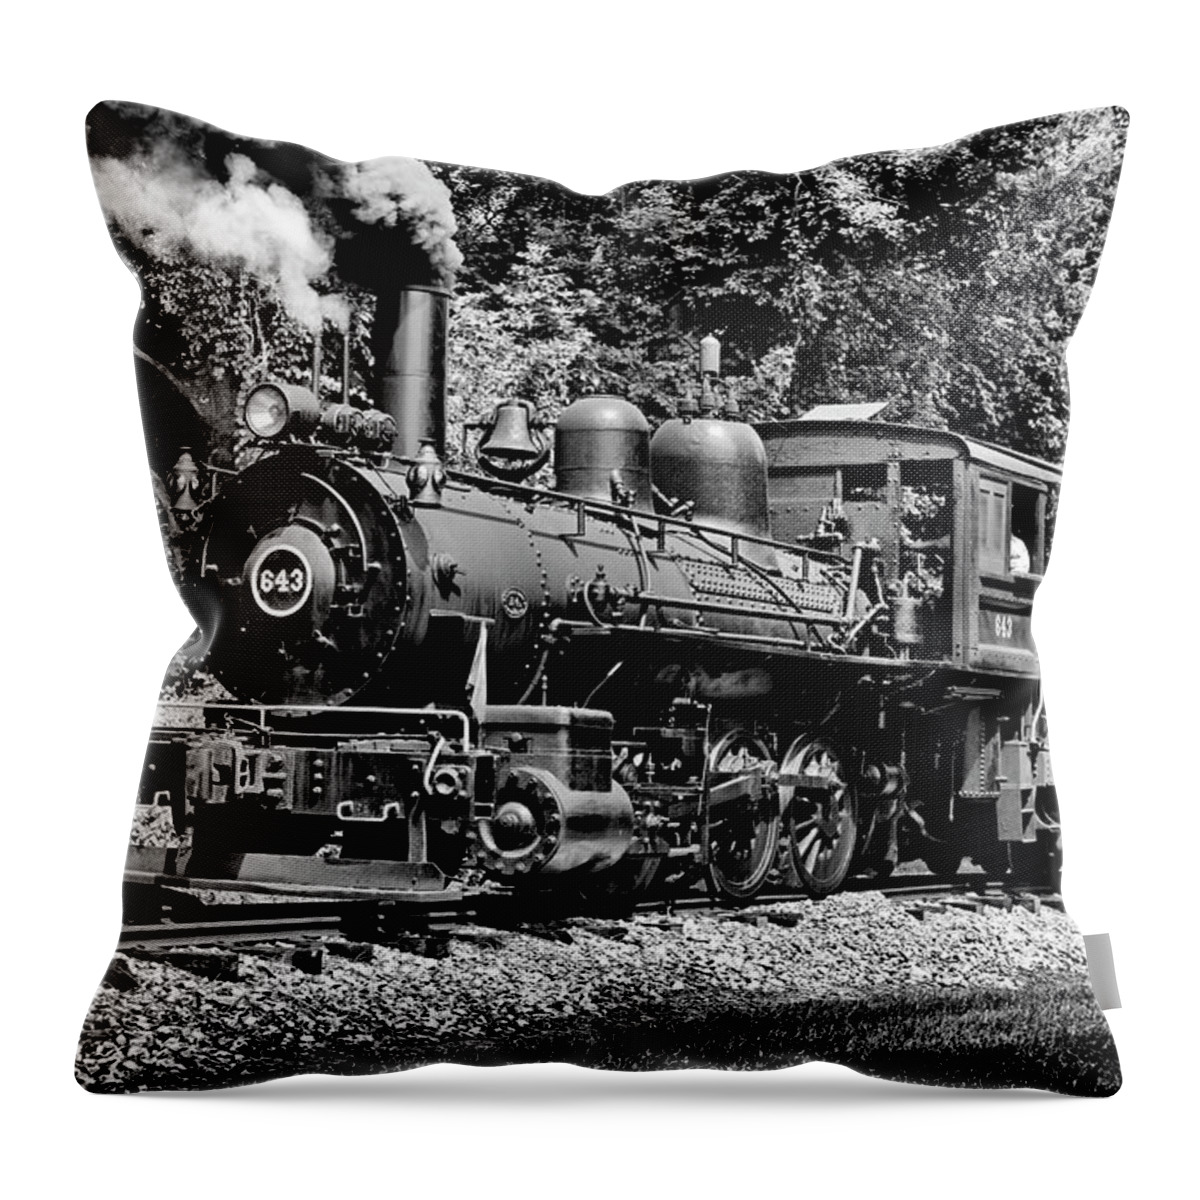 D2-rr-1594-b Throw Pillow featuring the photograph Old Engine 643 in BW by Paul W Faust - Impressions of Light